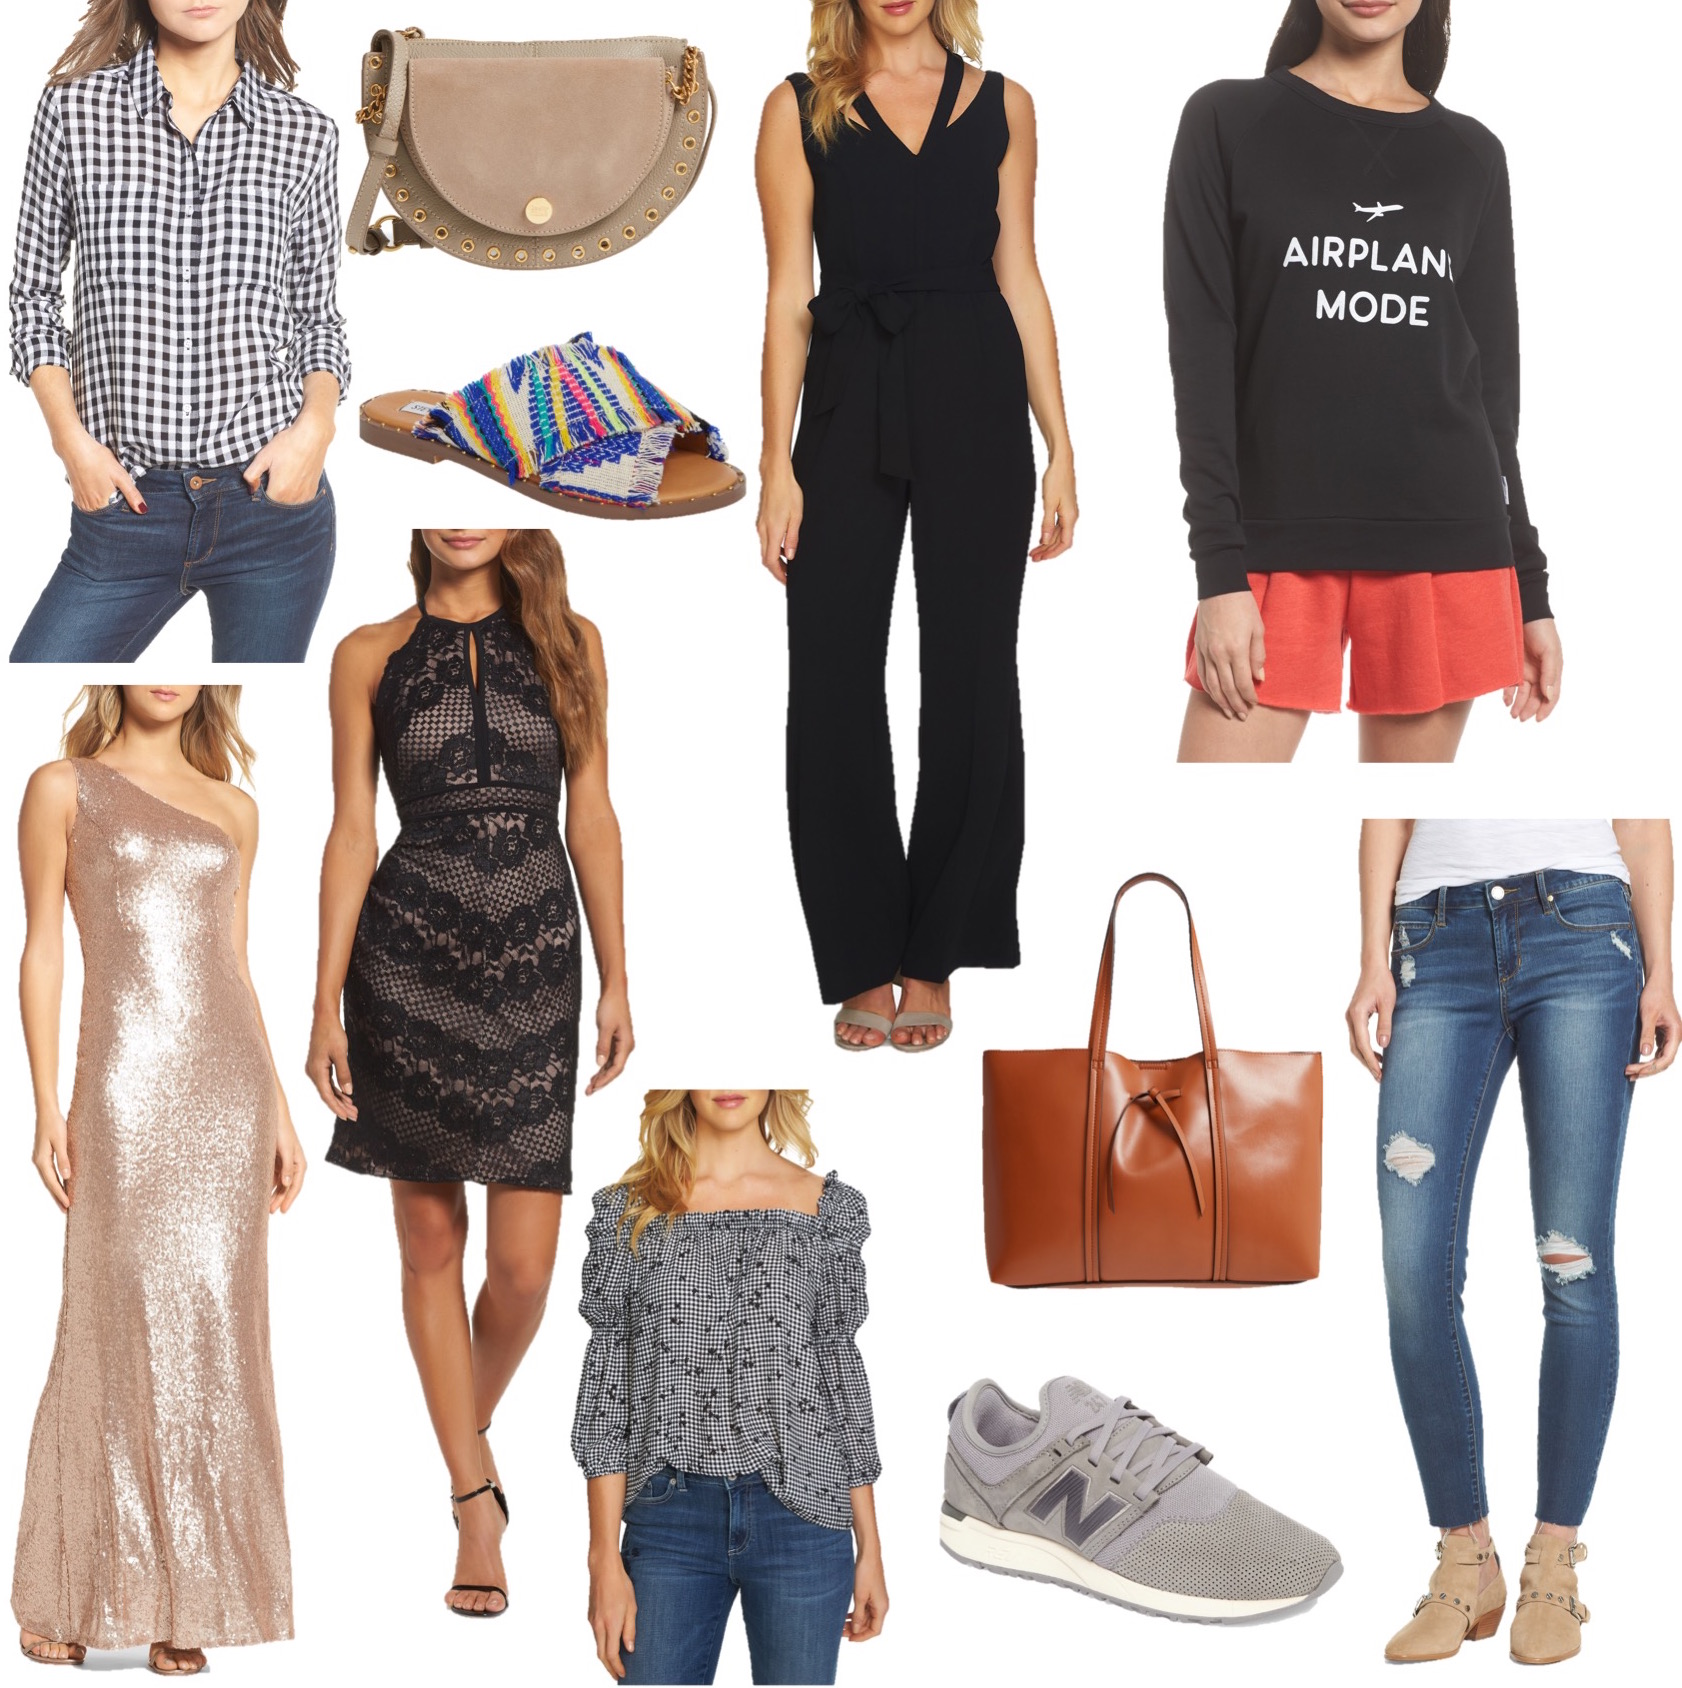 7 Ways to Dress for Going Shopping - wikiHow